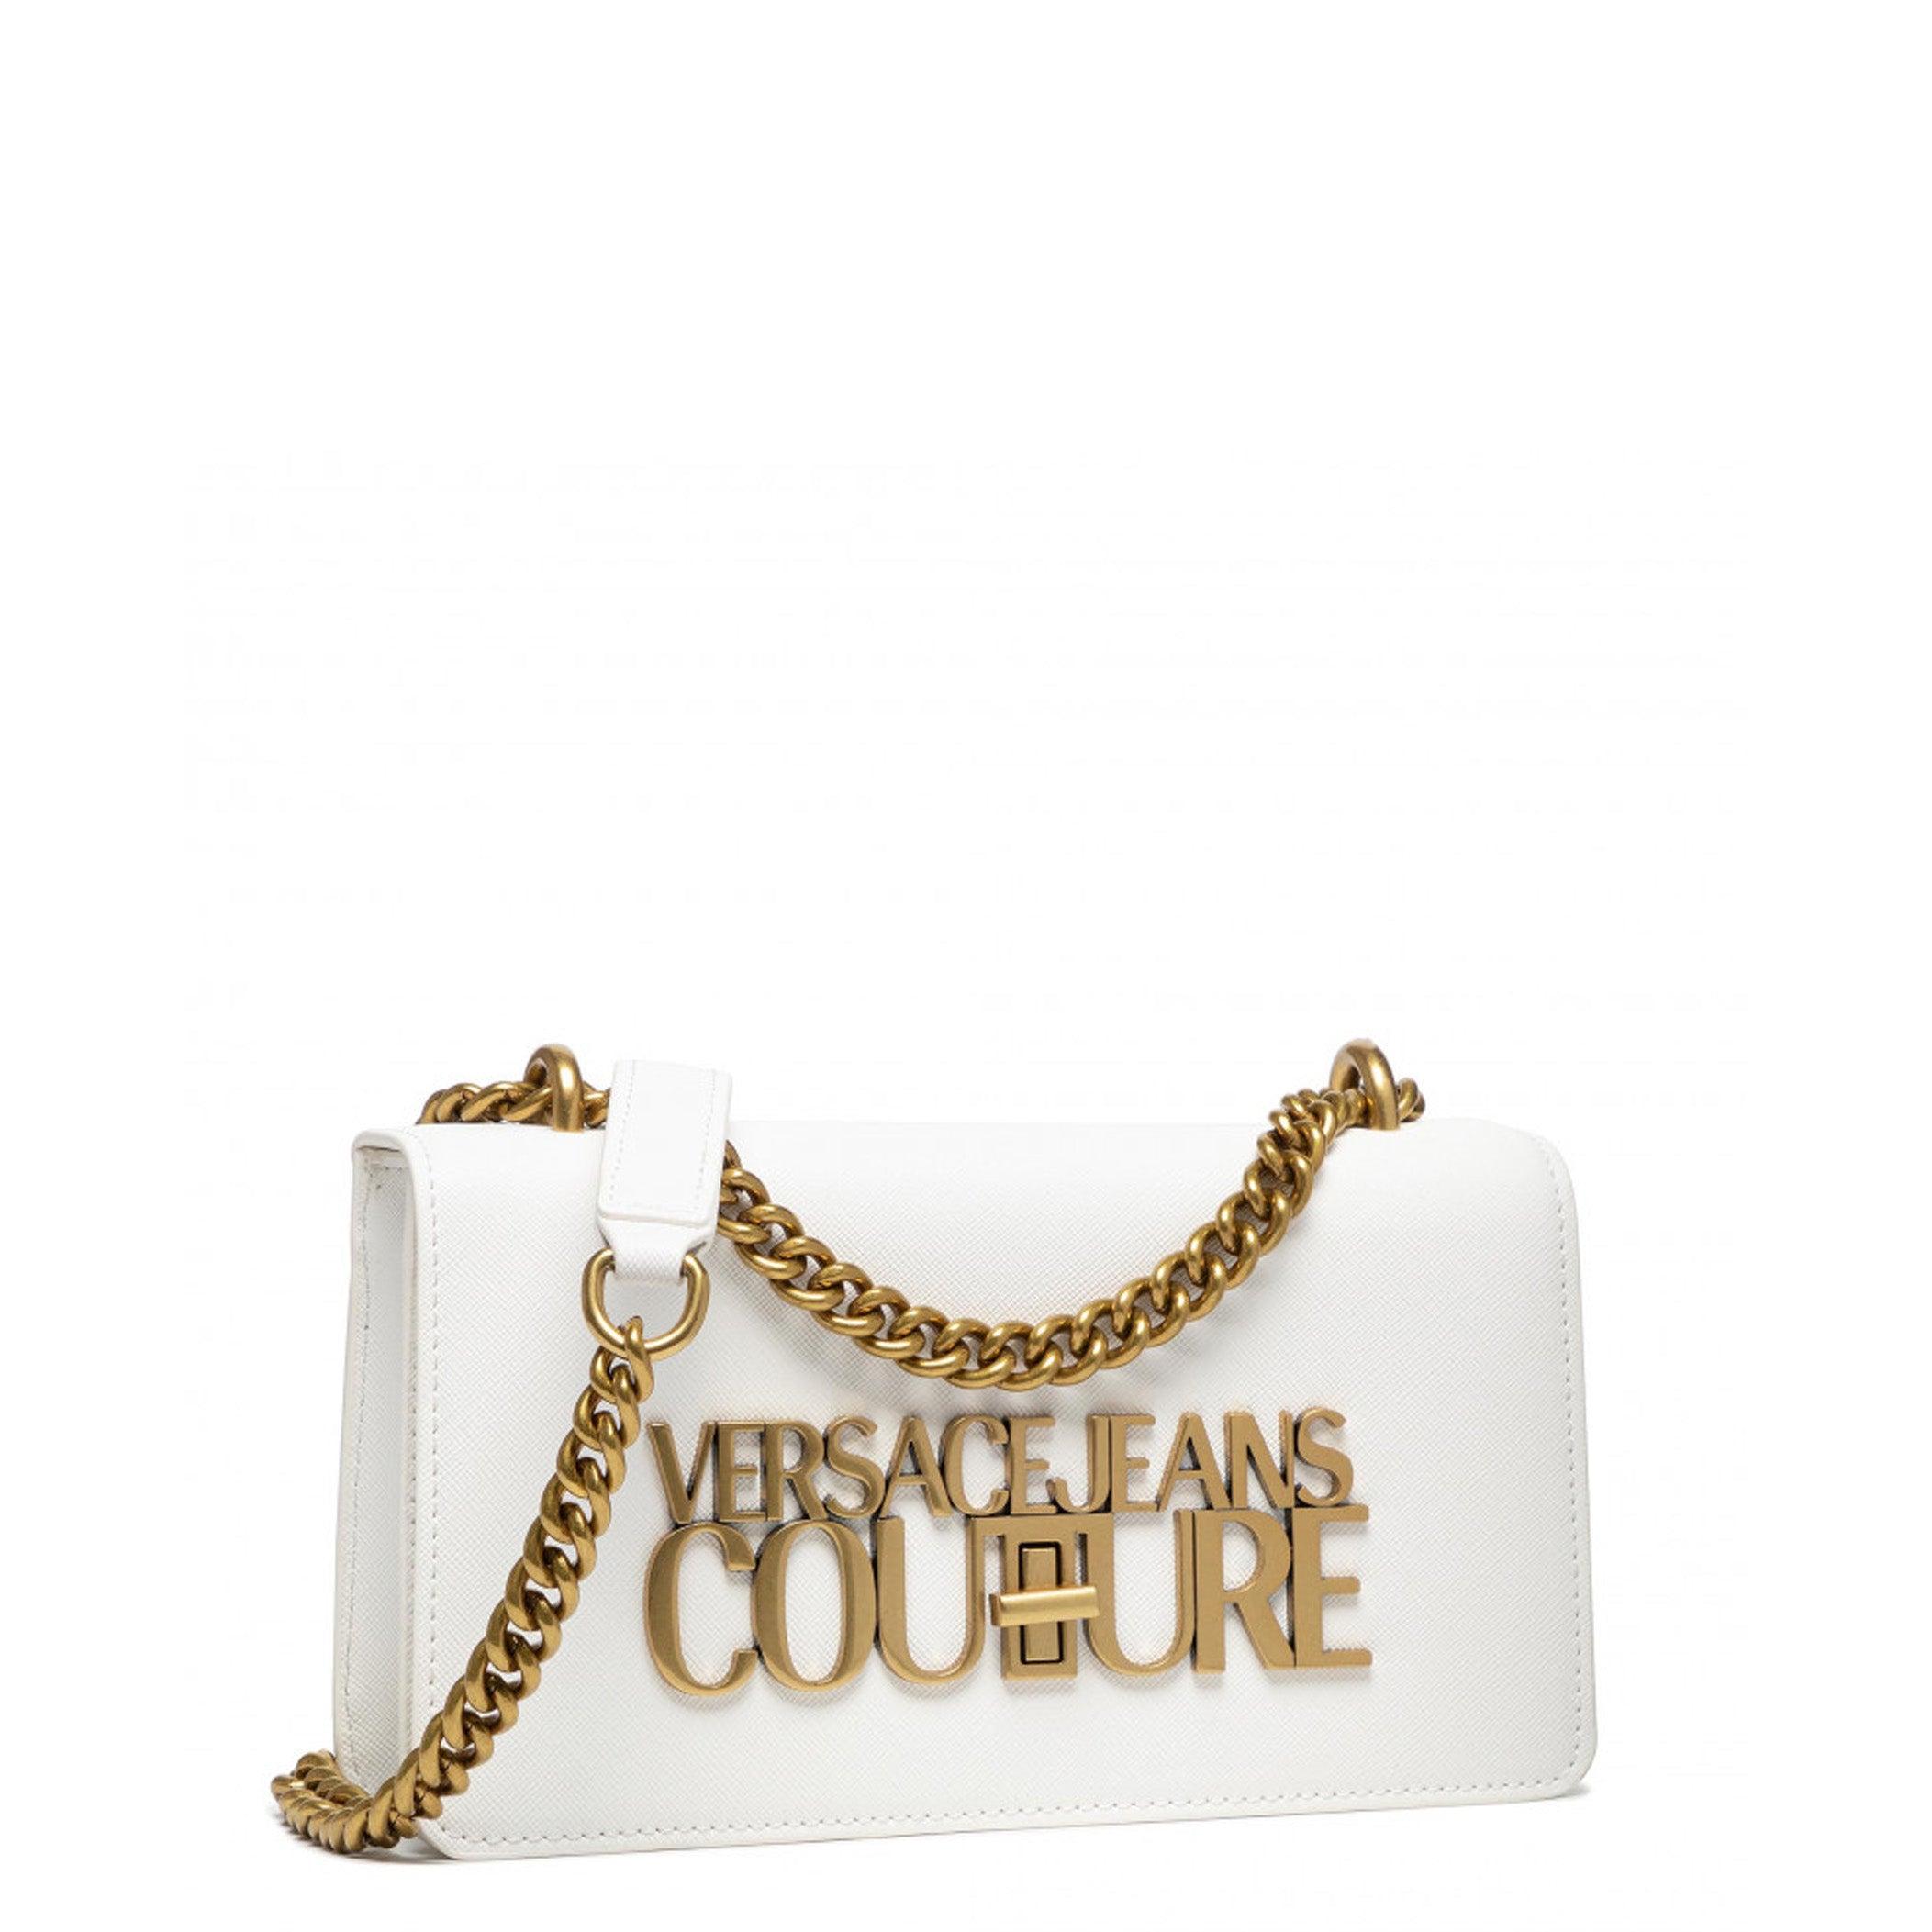 Versace Jeans Couture Lock Logo Bag in White Lyst